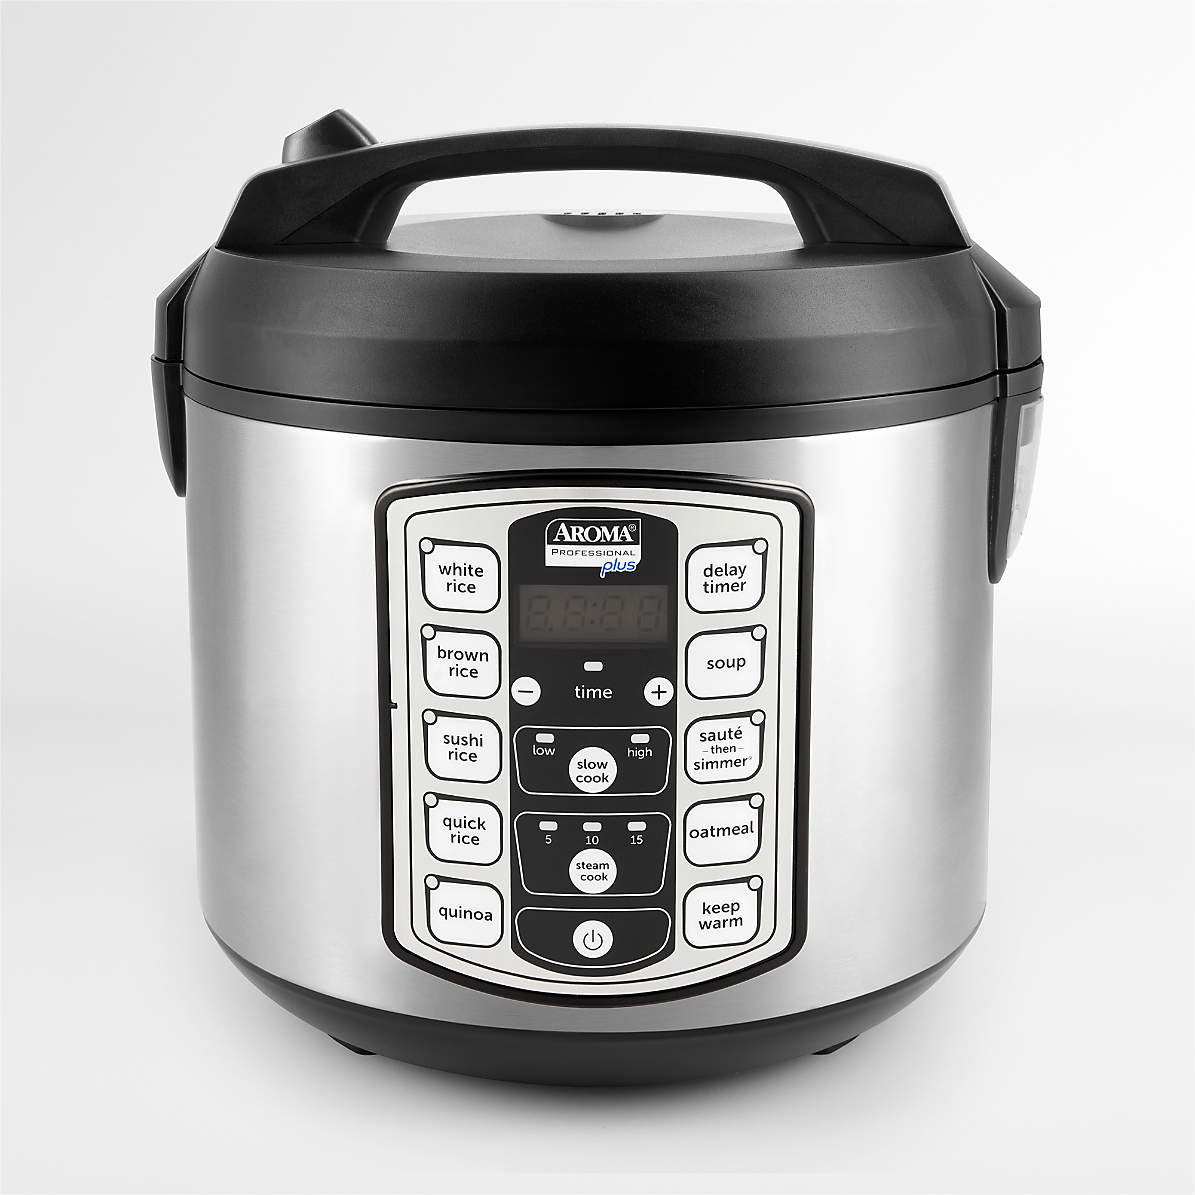 Aroma Professional 12-Cups Cooked 3 qt. 360 Induction Rice Cooker & Multicooker